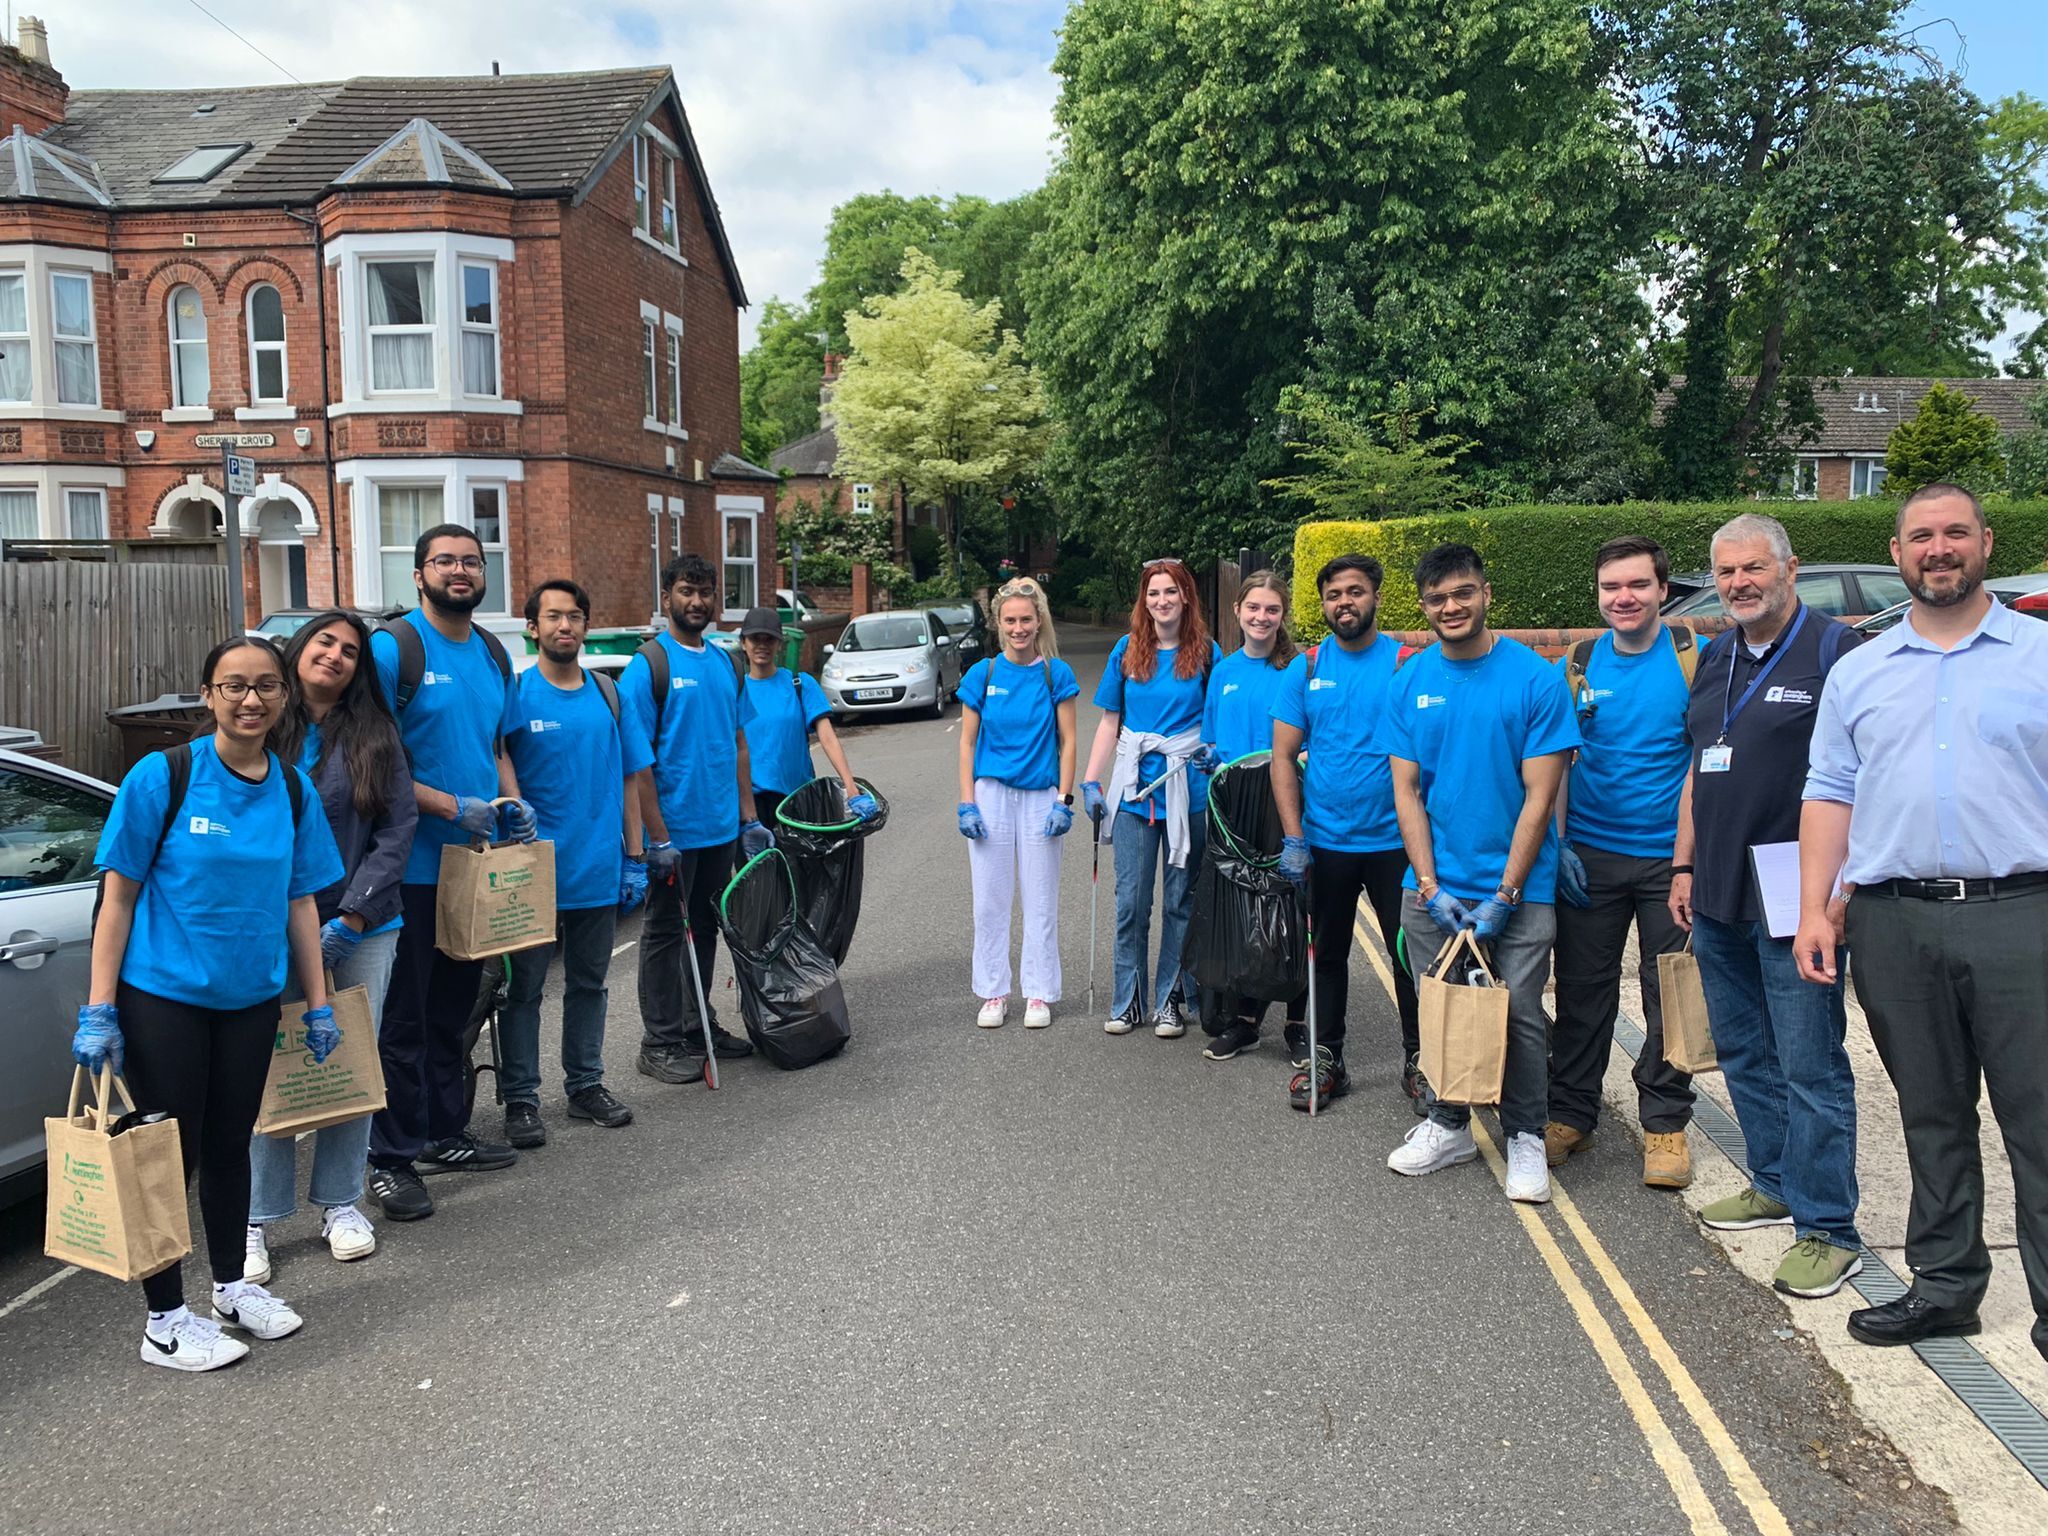 Student Ambassadors keeping the streets of Radford and Lenton clean and promoting good neighbour values